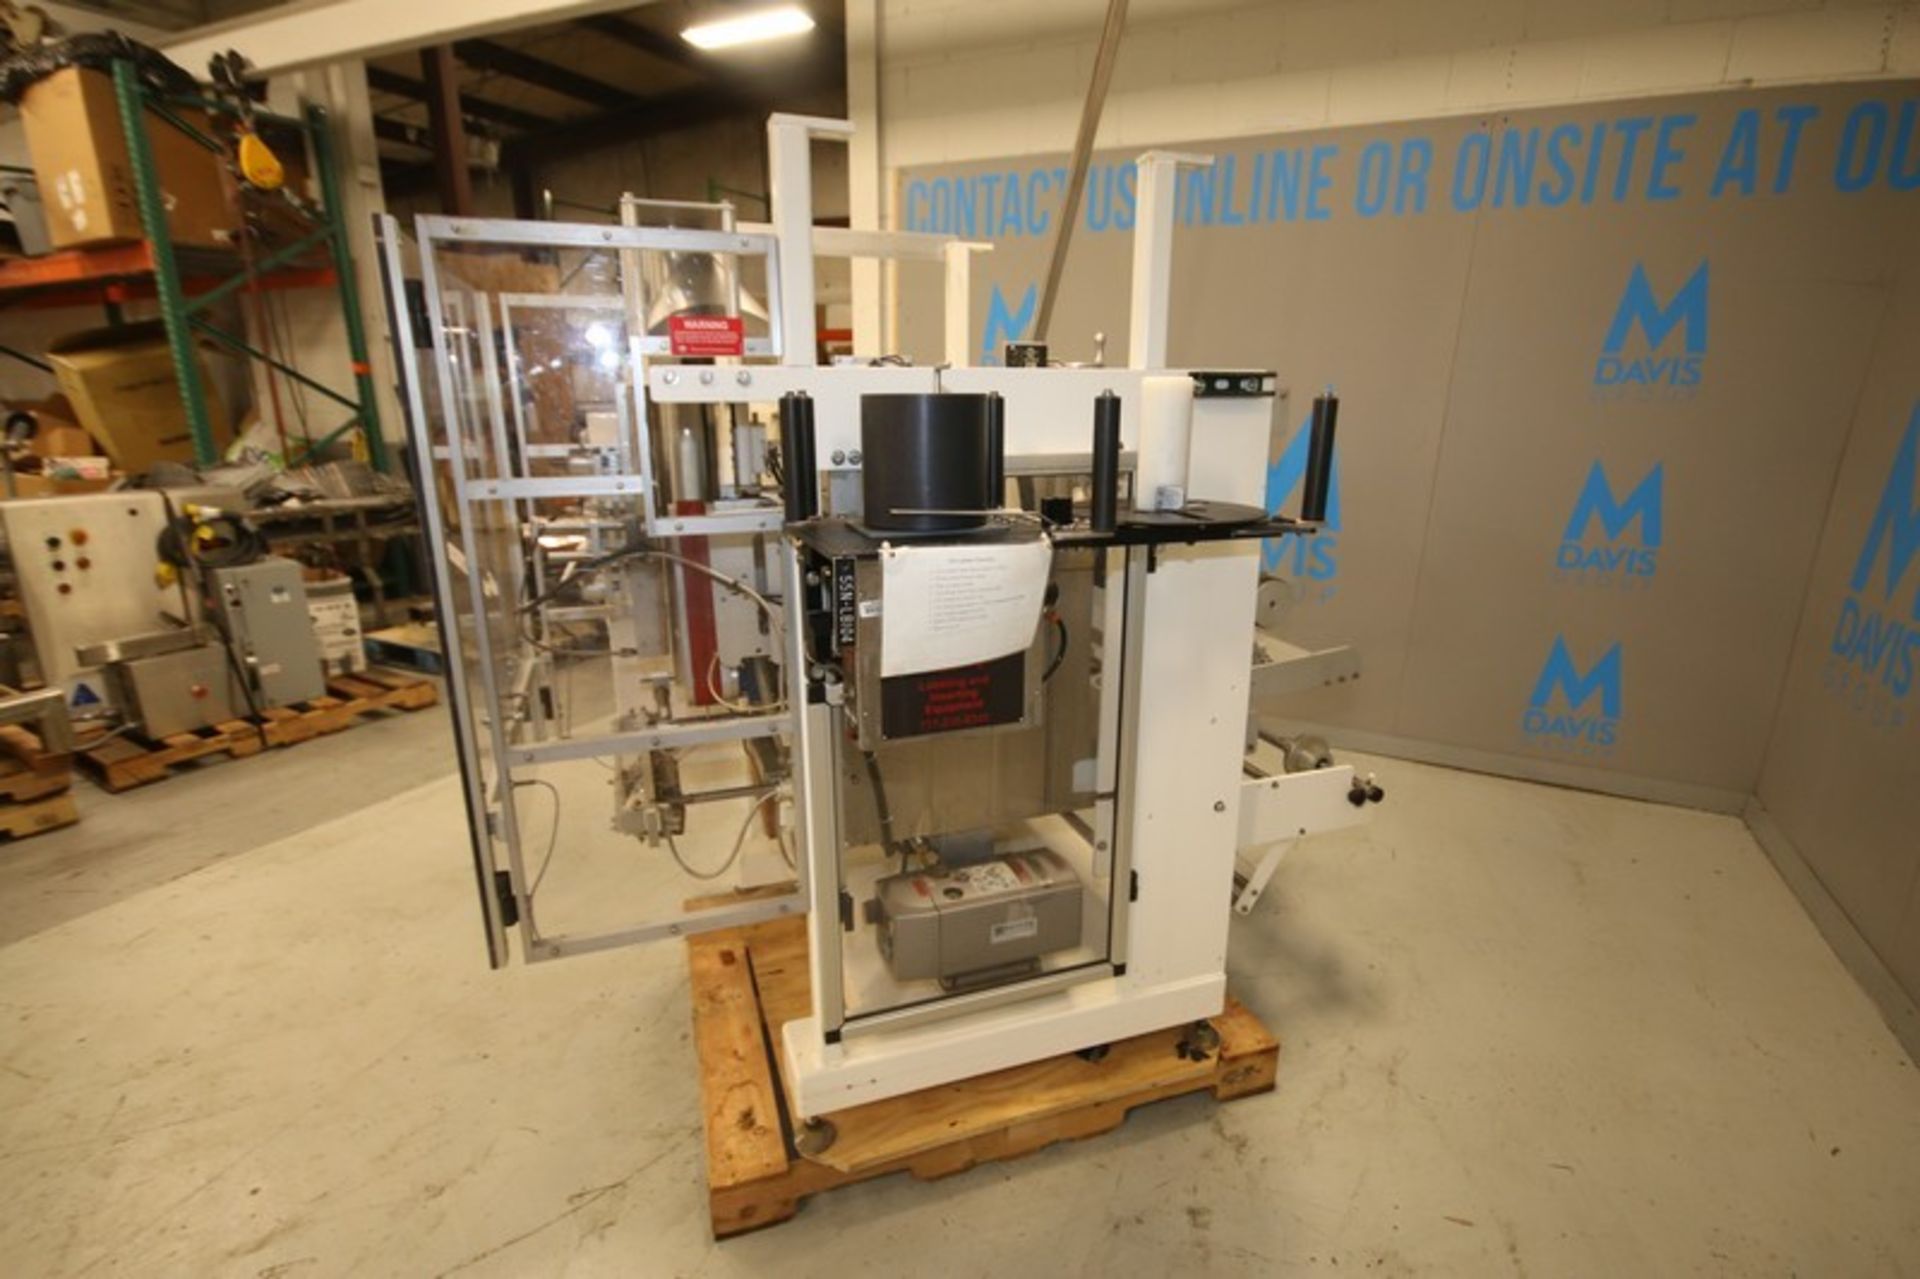 Universal Packaging Vertical Form Fill & Seal Packaging Machine (VFFS), Model S2000C, SN 1709, - Image 9 of 12